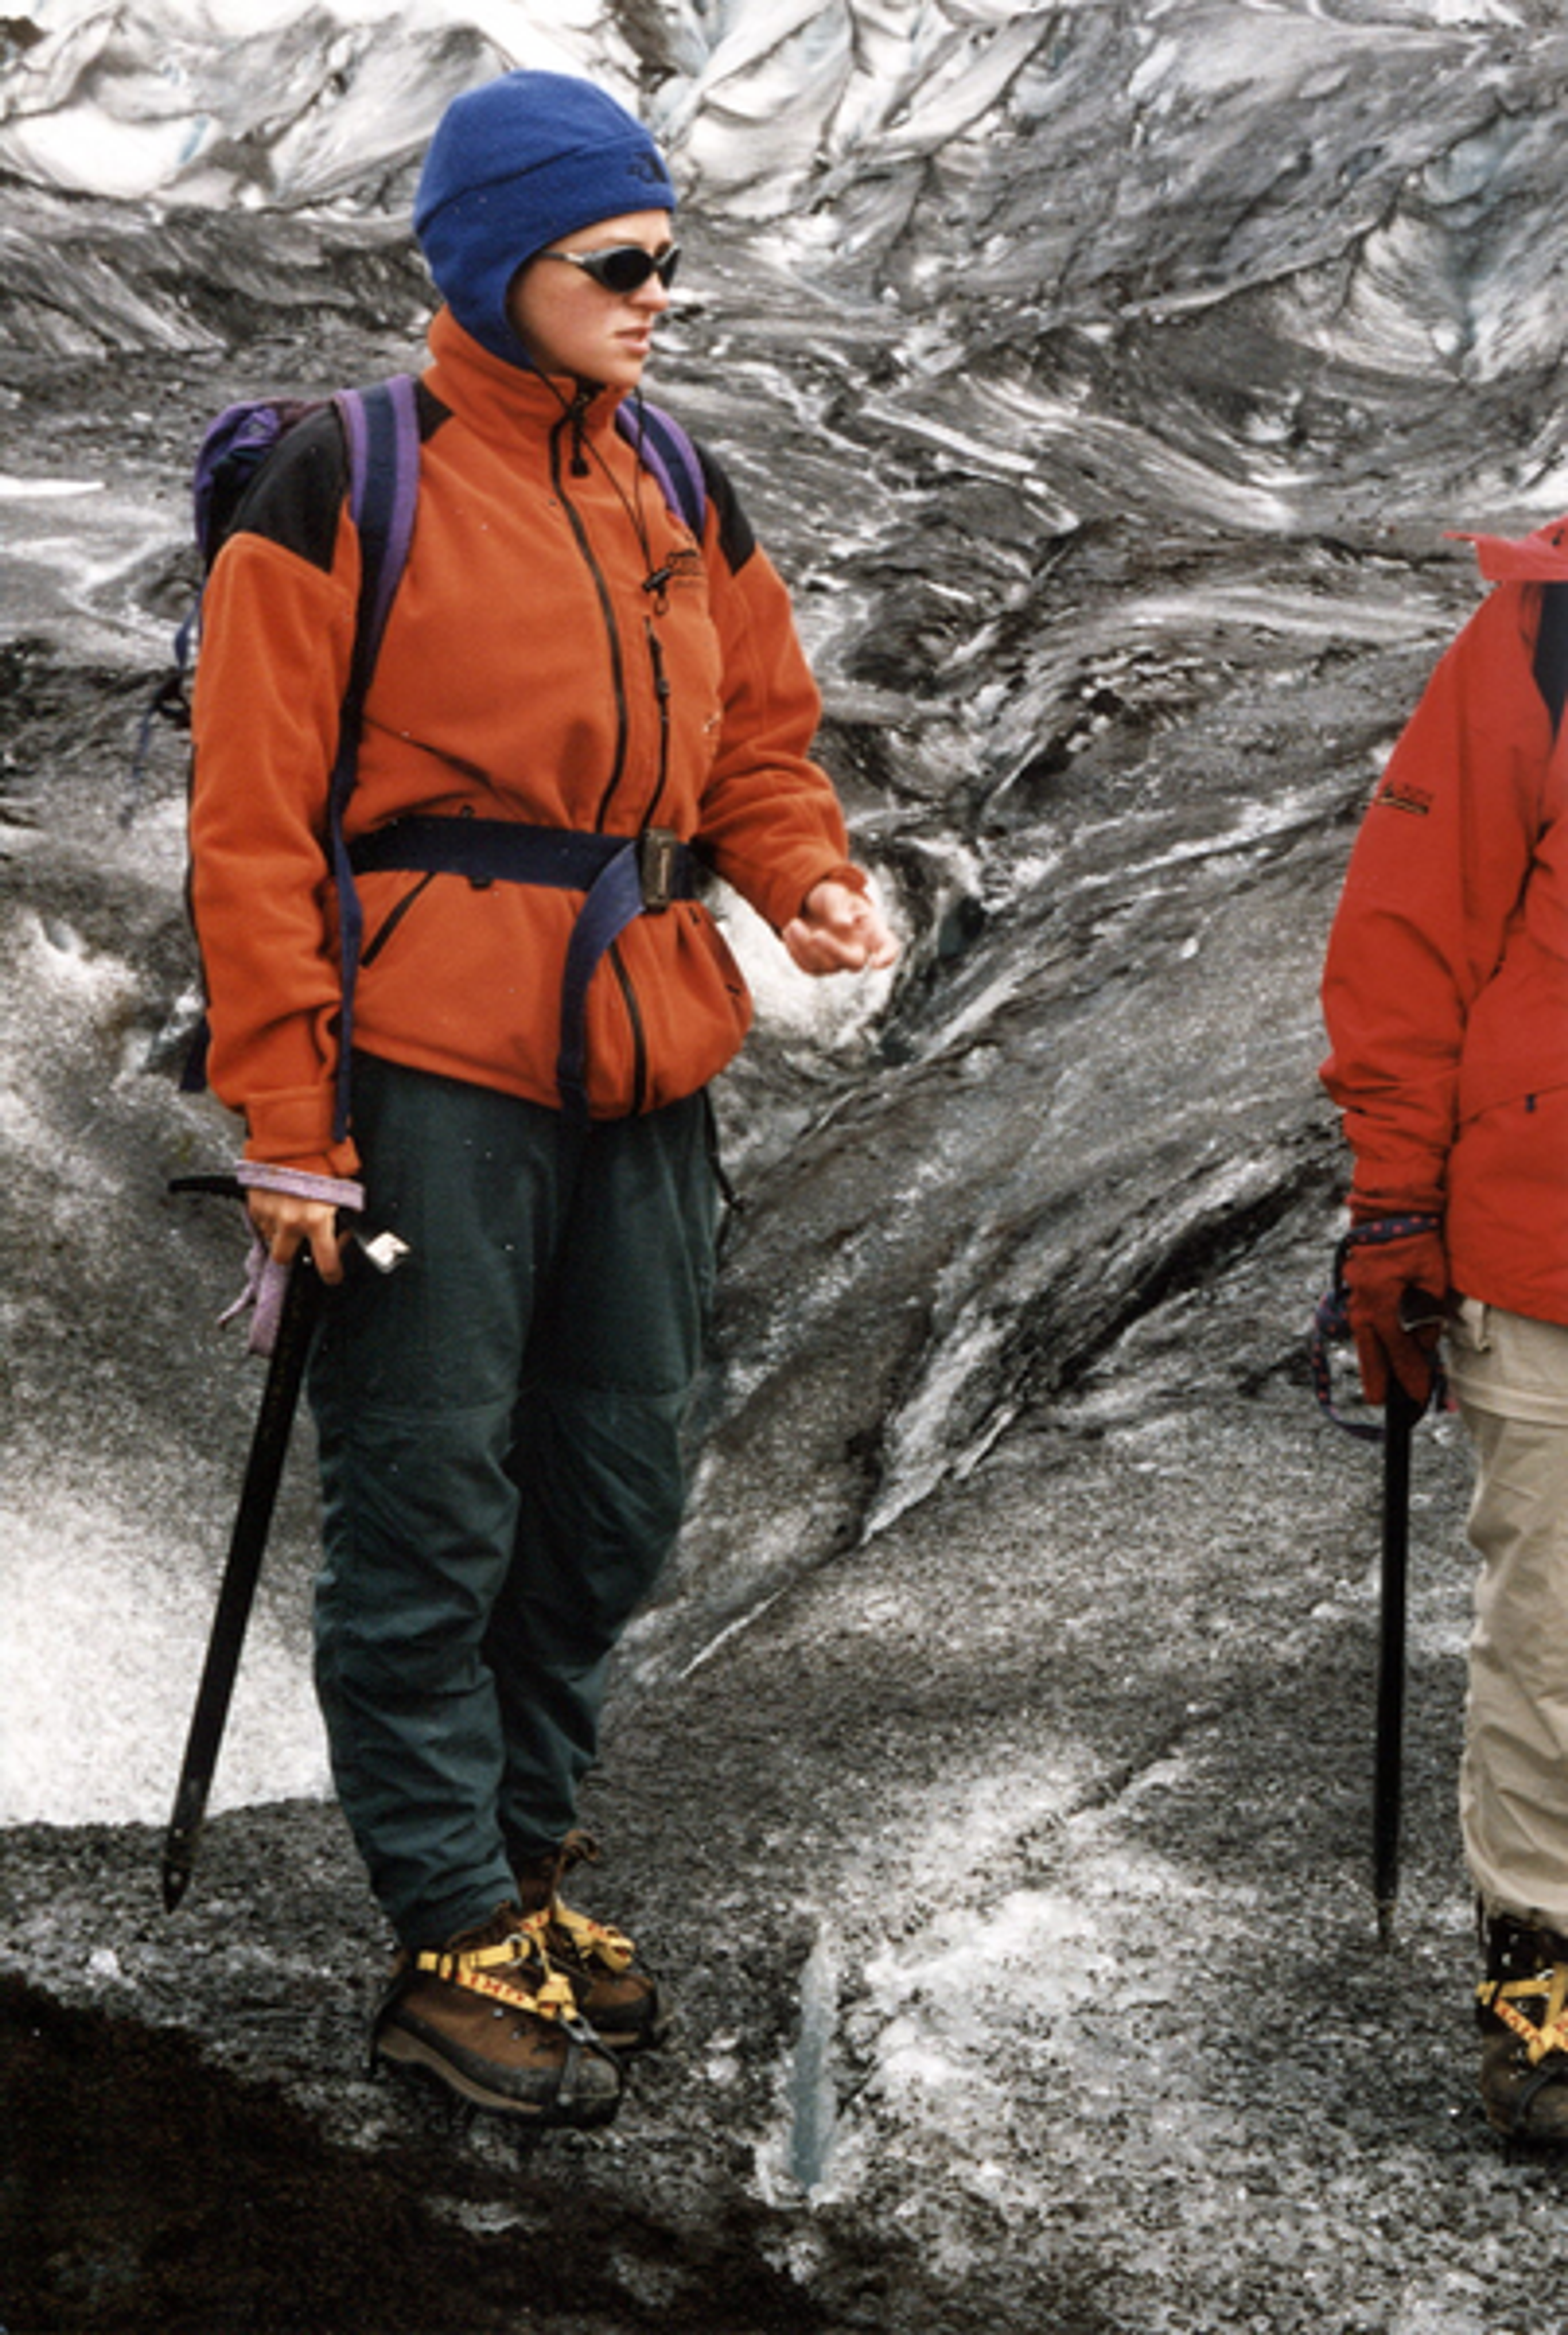 A young woman outfitted in cold weather hiking gear stands on a rocky terrain with a glacier in the background.